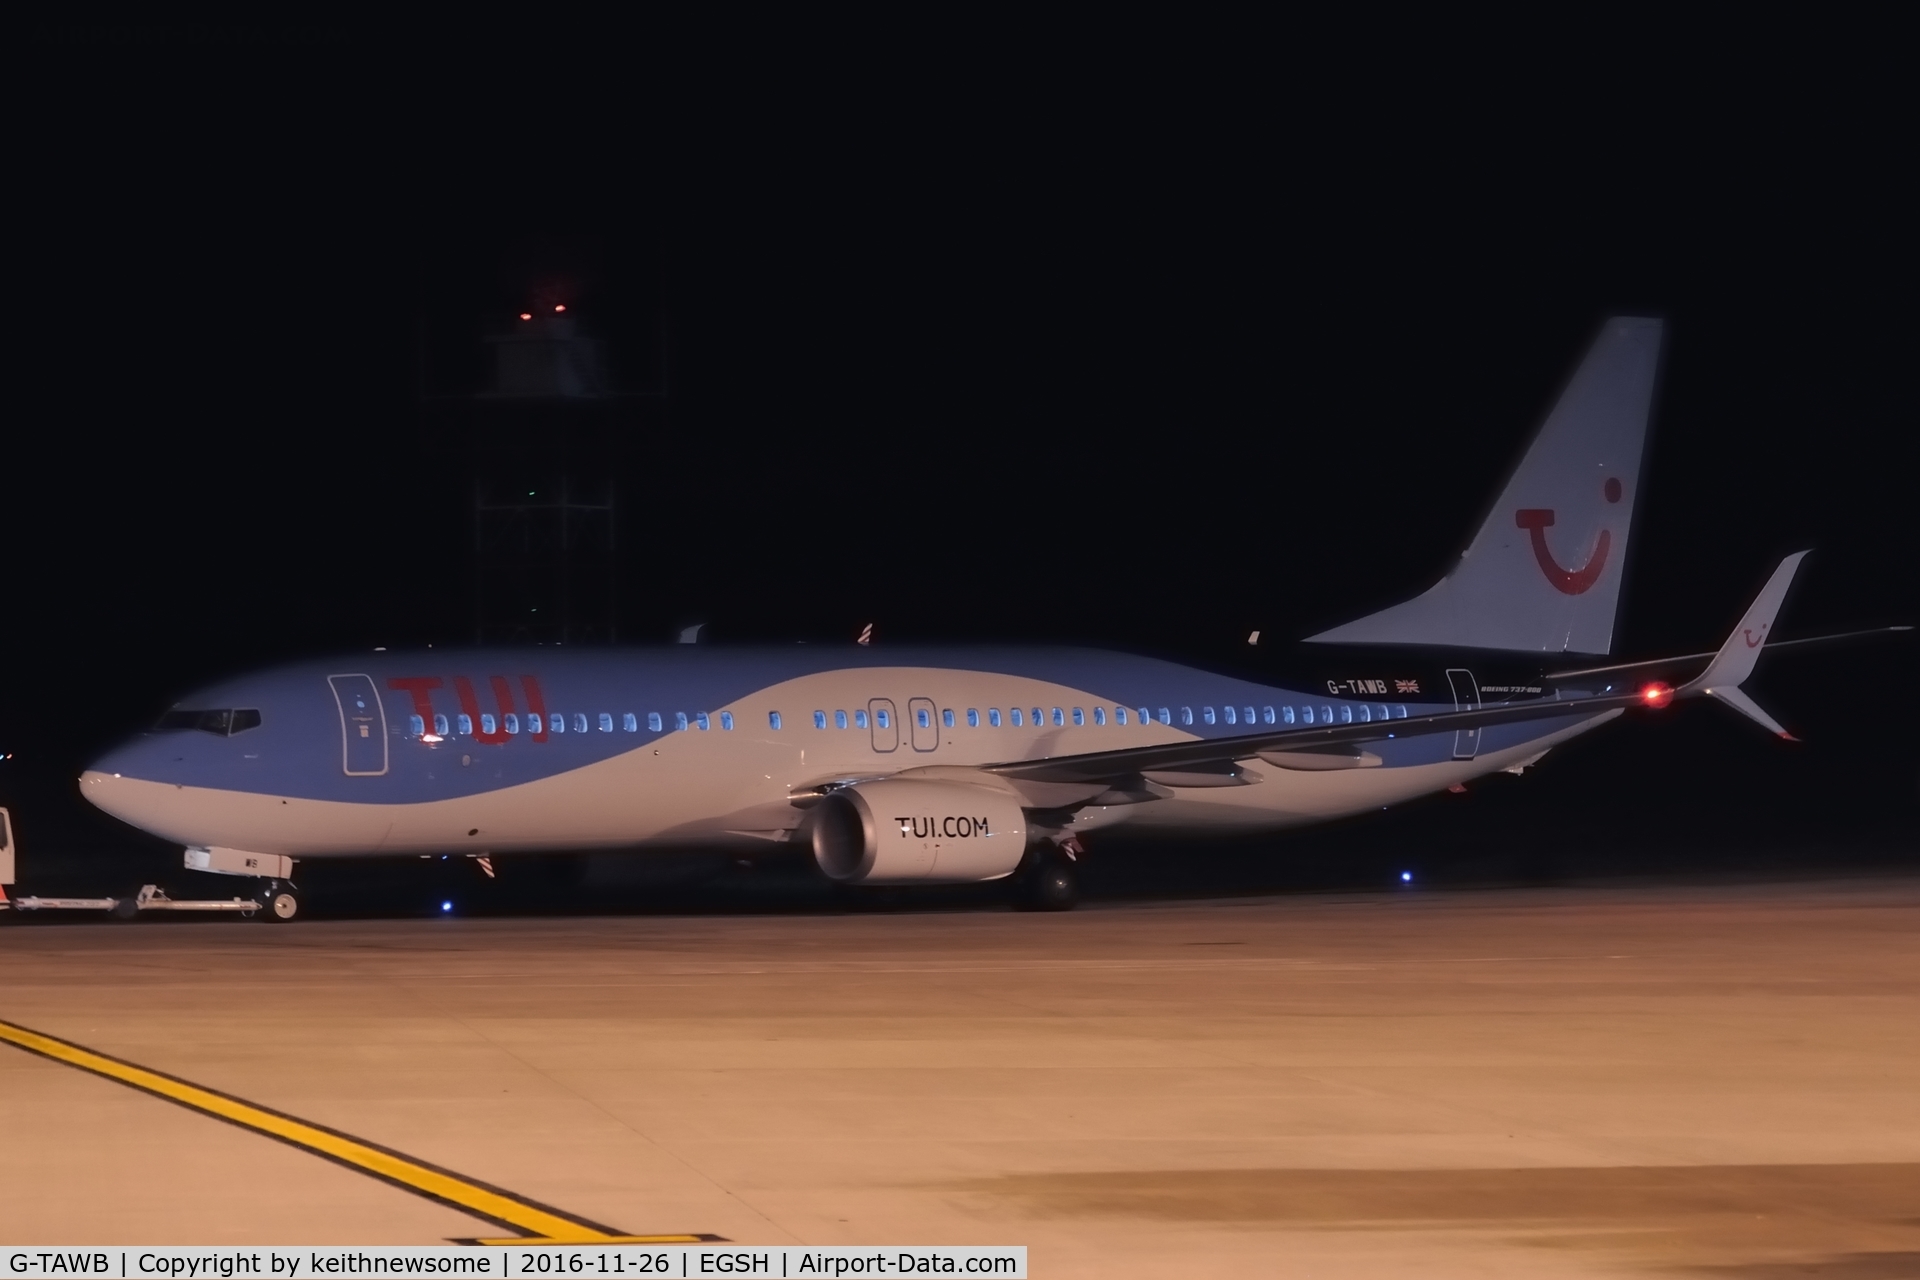 G-TAWB, 2012 Boeing 737-8K5 C/N 37242, Towed from spray with TUI titles.